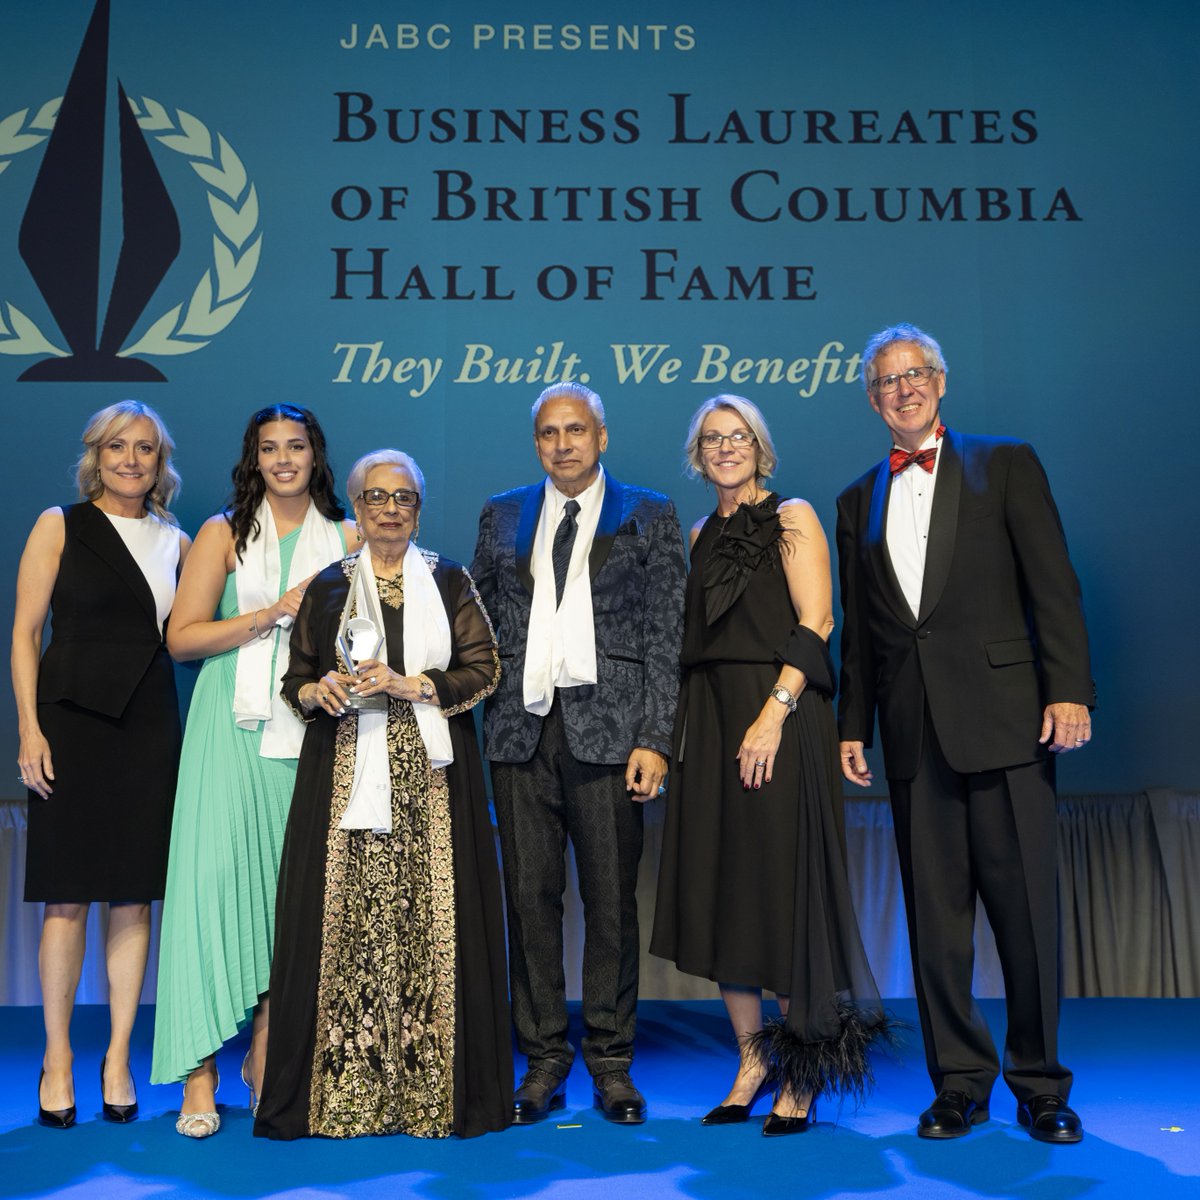 Congratulations to the family of Dr. Asa Johal, O.C., O.B.C., on his induction into the Business Laureates of B.C. Hall of Fame. We’re grateful for his family’s support which has spanned over 3 decades. Thank you, Dr. Johal, for all you've done for BC’s kids. @jeeviejaiho @payalf